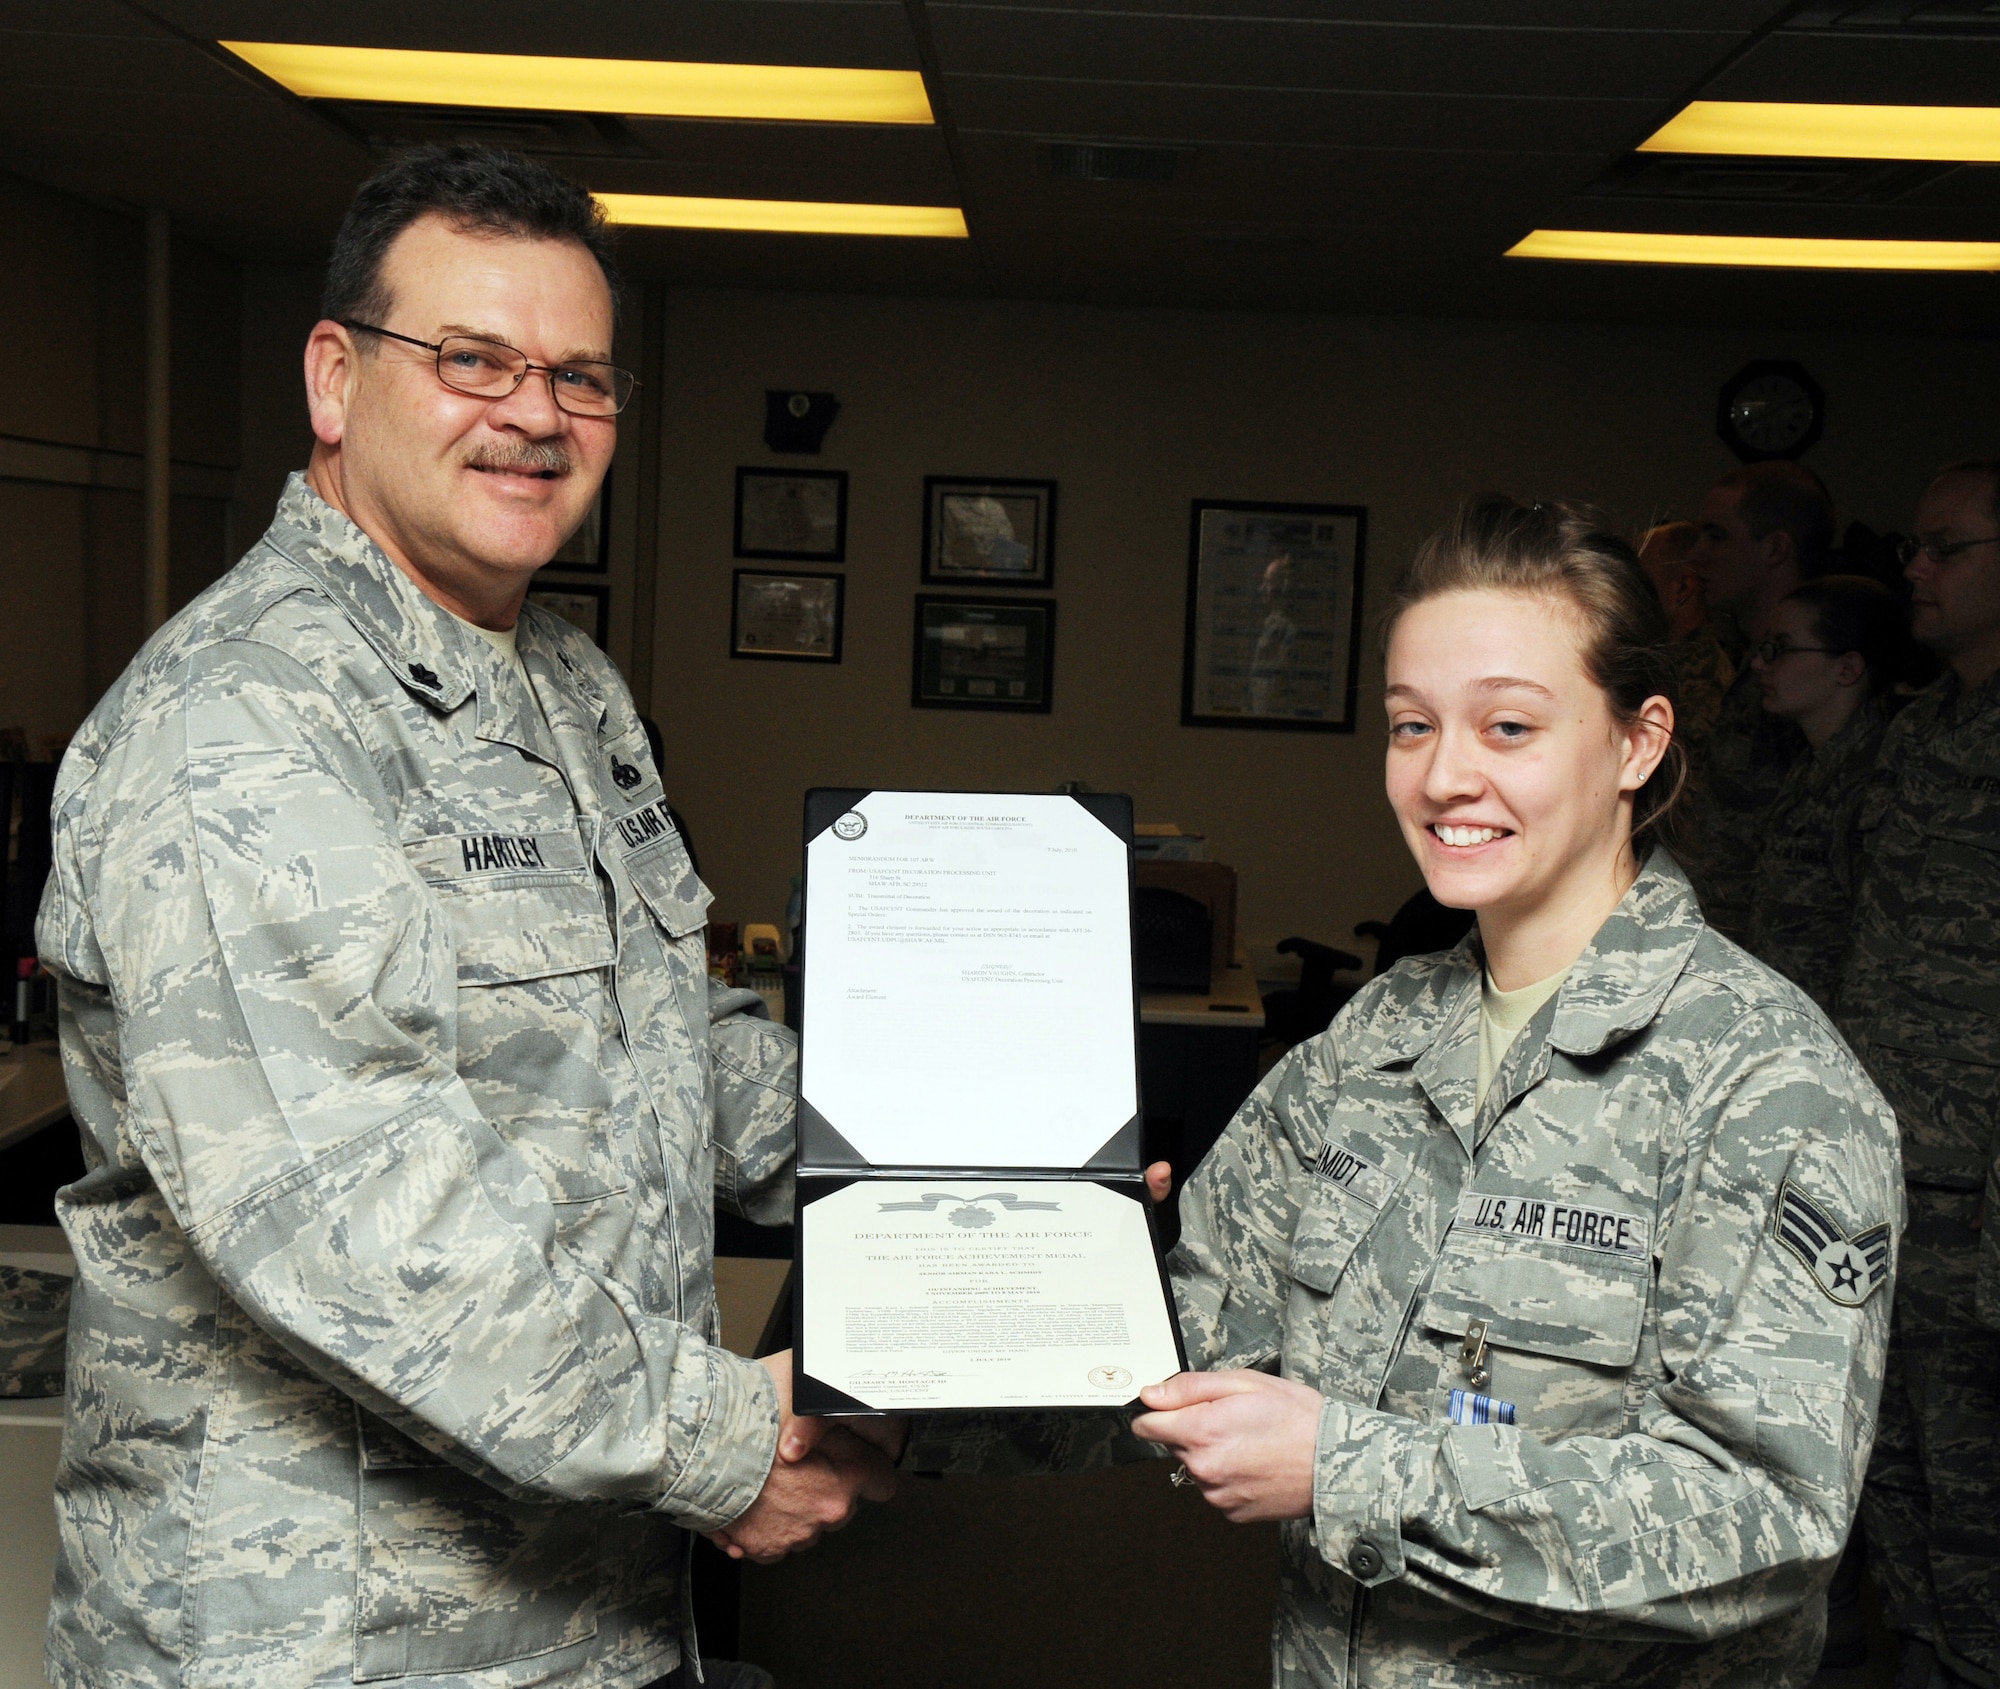 Senior Airman Kara Schmidt was awarded the Air Force Achievement Medal for her outstanding work performance. Lt. Col. Doug Hartley presented her the medal. (U.S. Air Force photo/Tech. Sgt. Justin Huett)